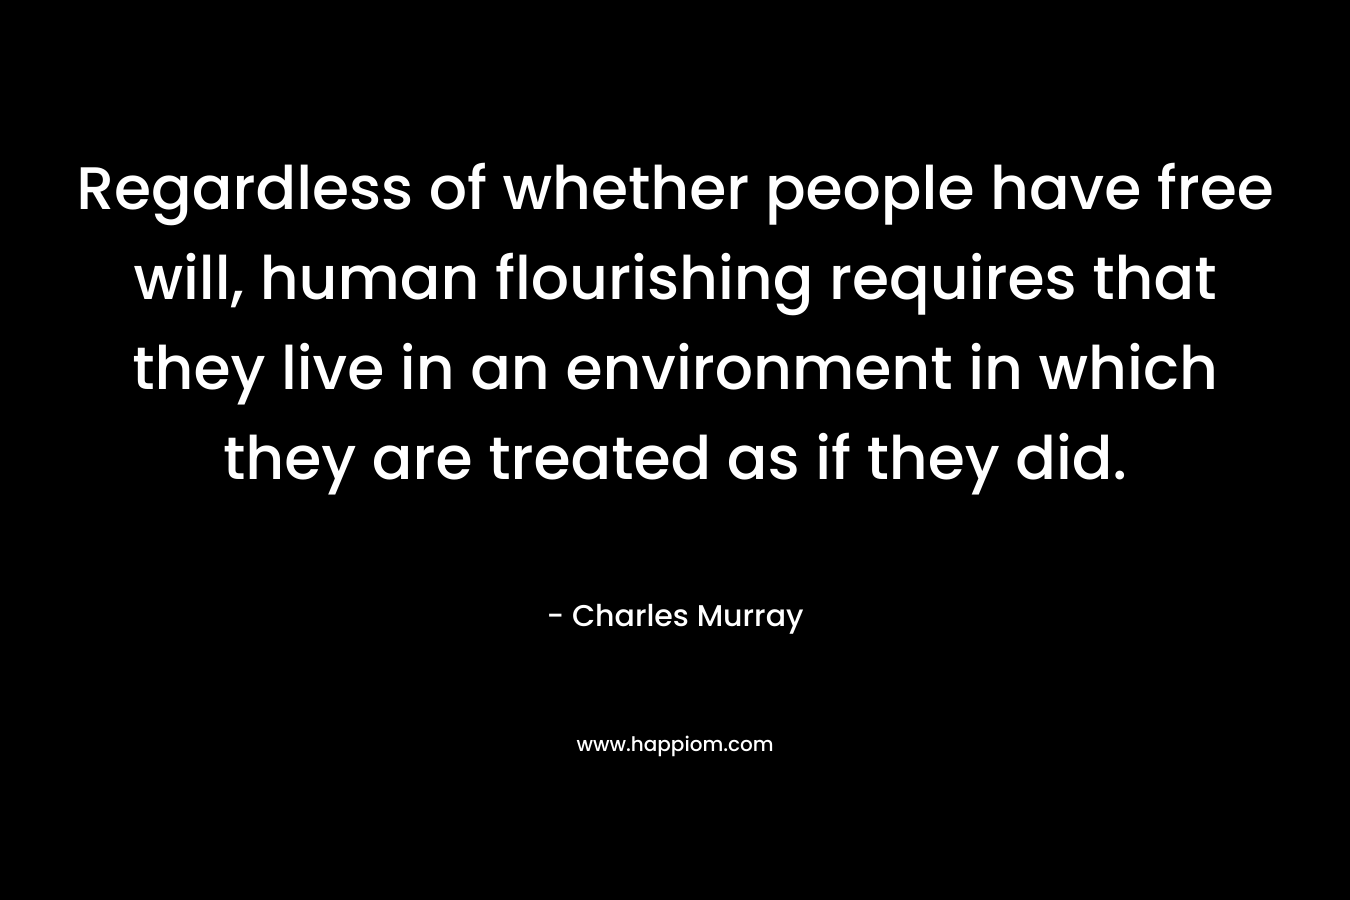 Regardless of whether people have free will, human flourishing requires that they live in an environment in which they are treated as if they did. – Charles Murray